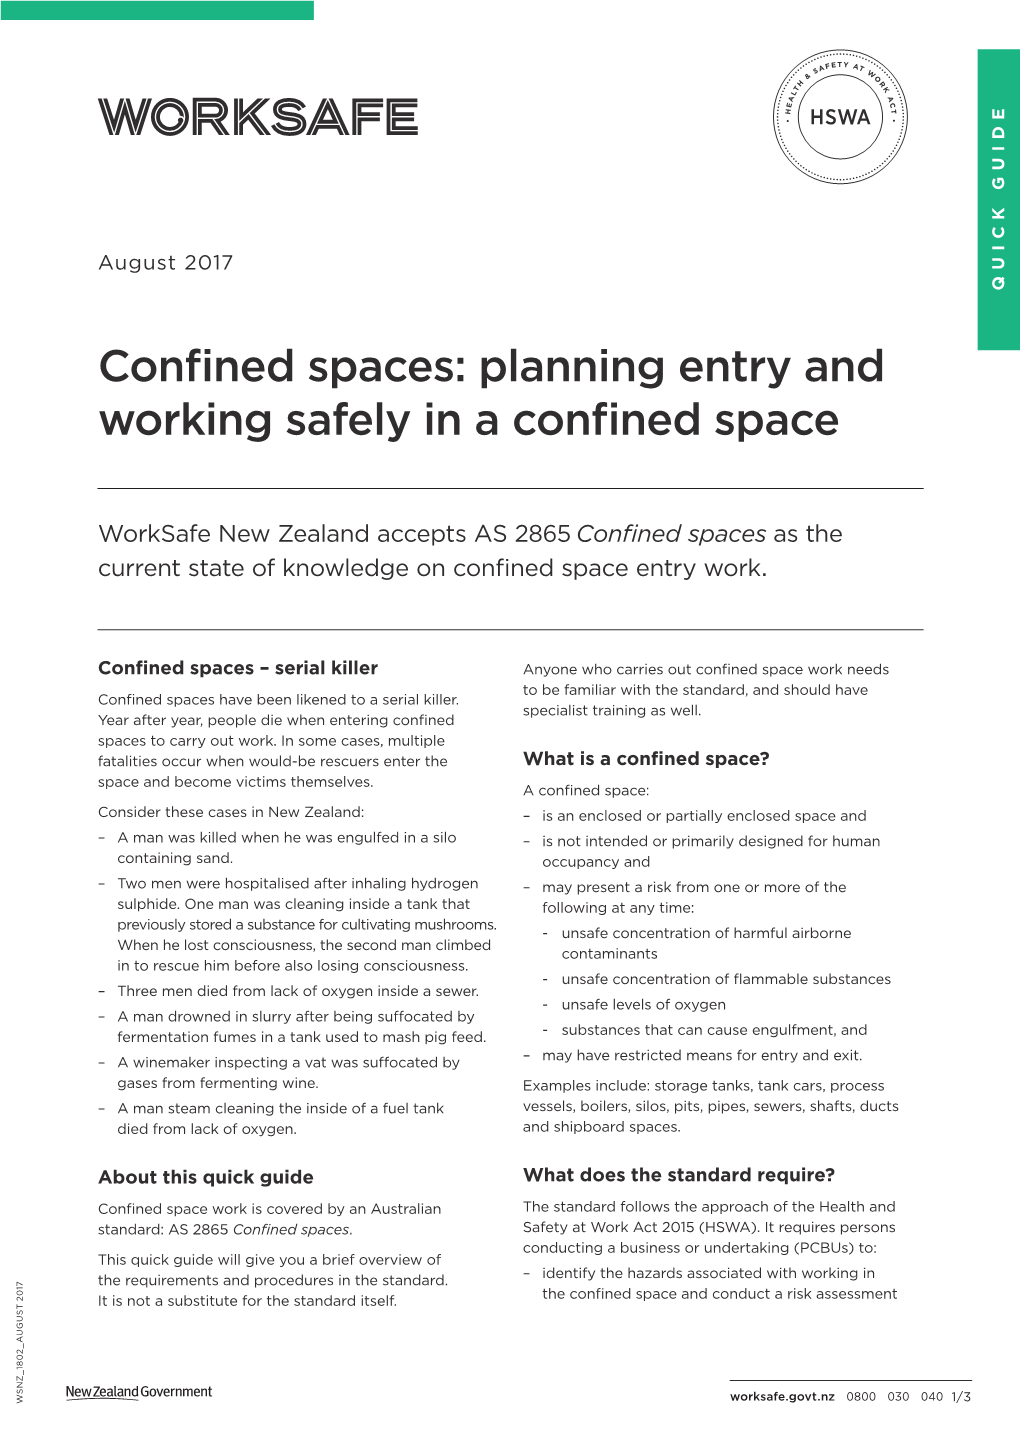 Confined Spaces: Planning Entry and Working Safely in a Confined Space